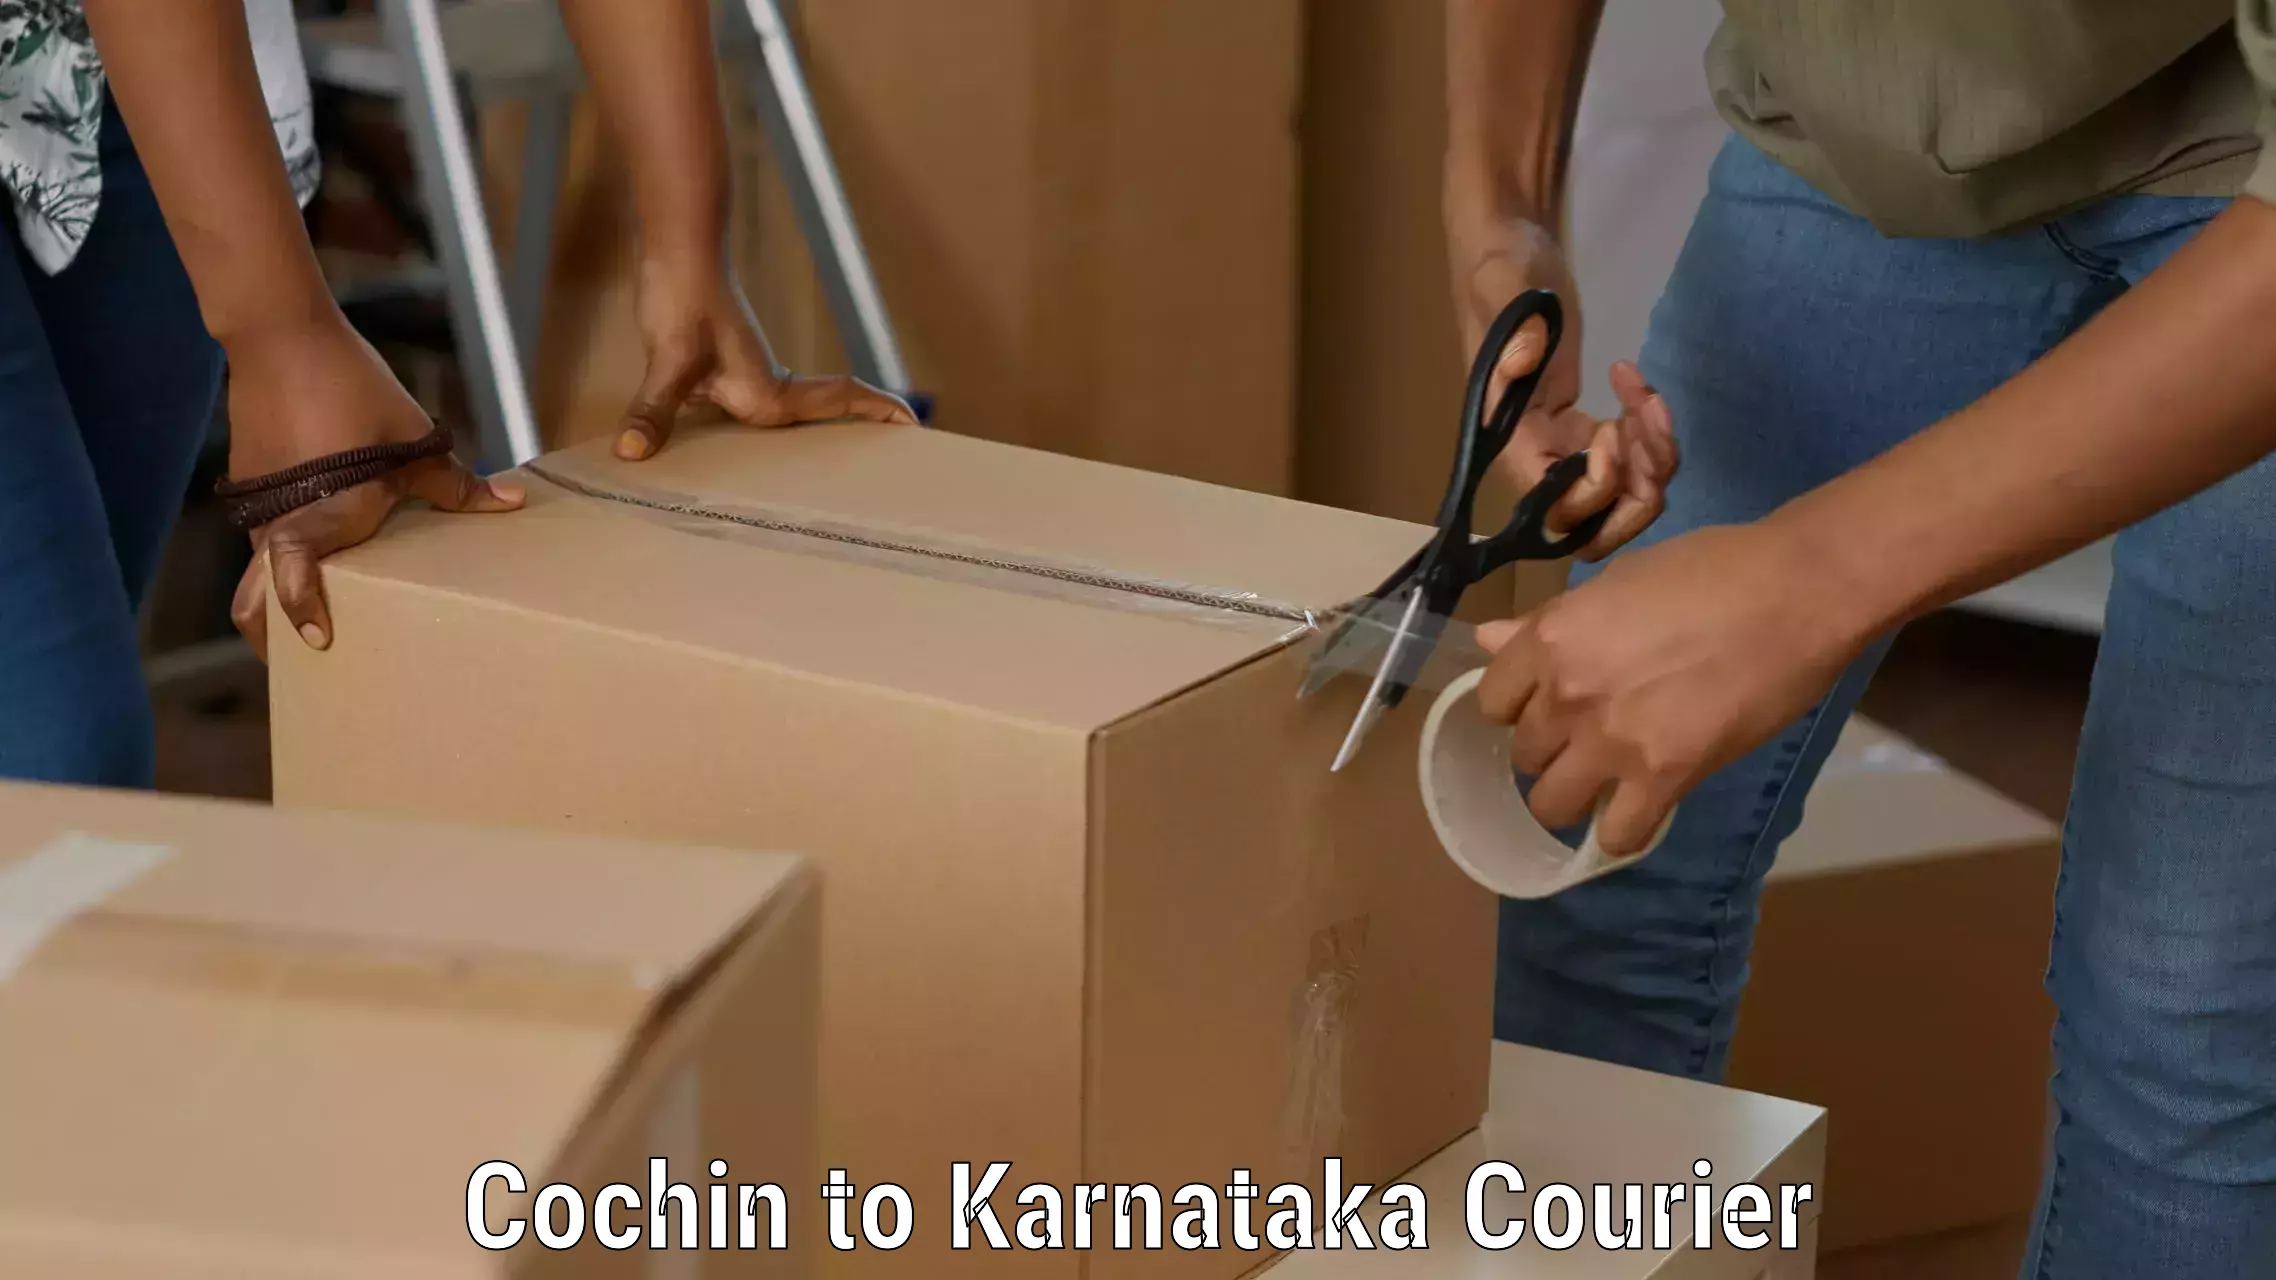 Reliable courier service in Cochin to Bewoor